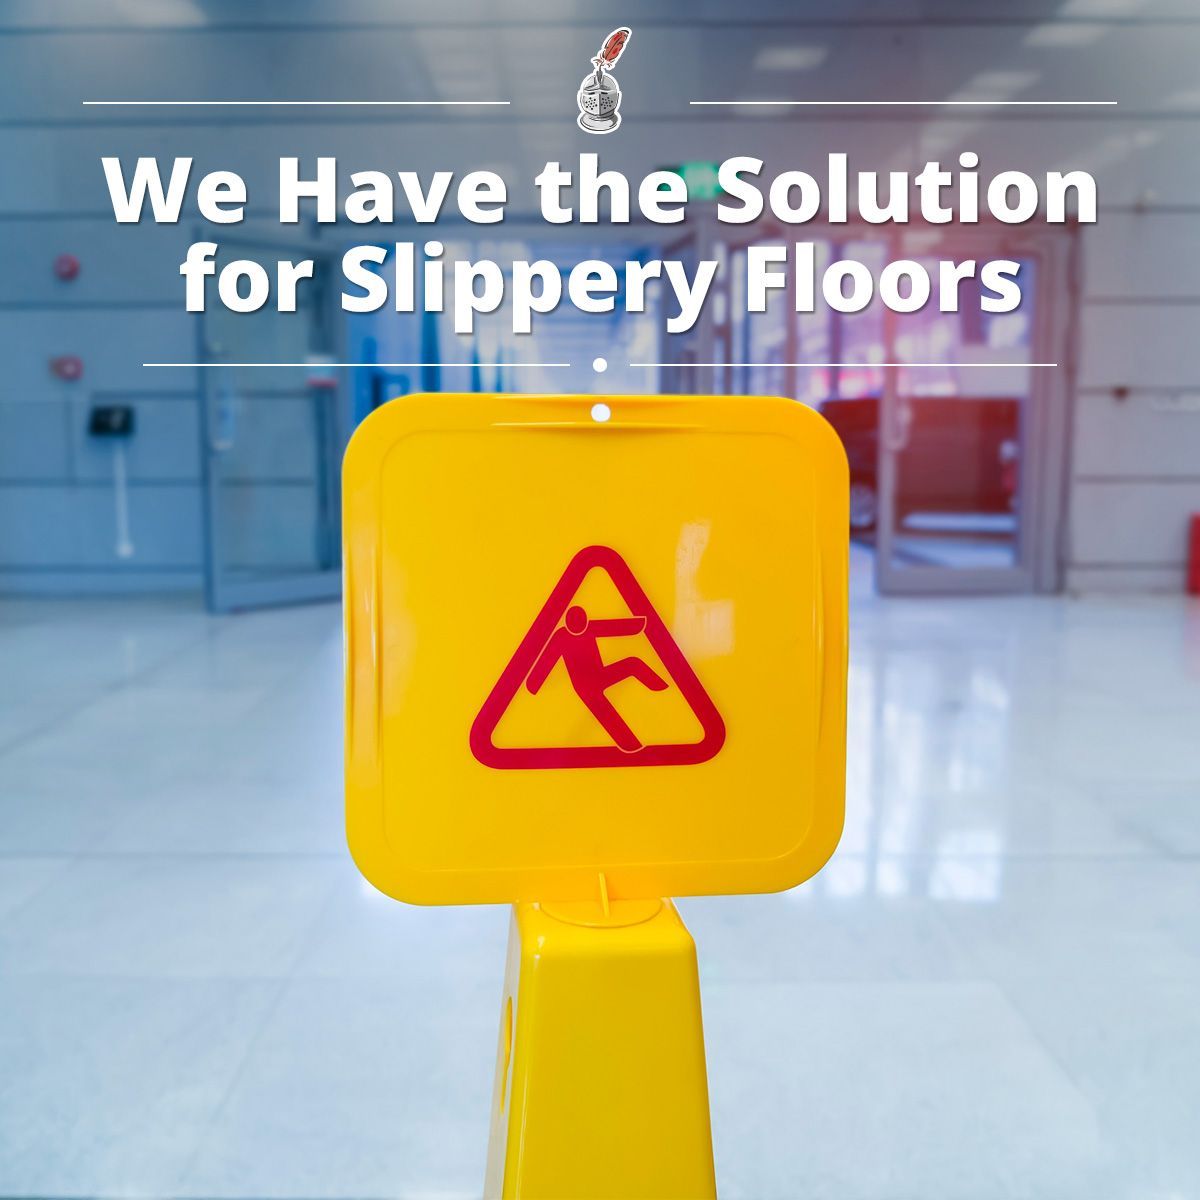 We Have the Solution for Slippery Floors